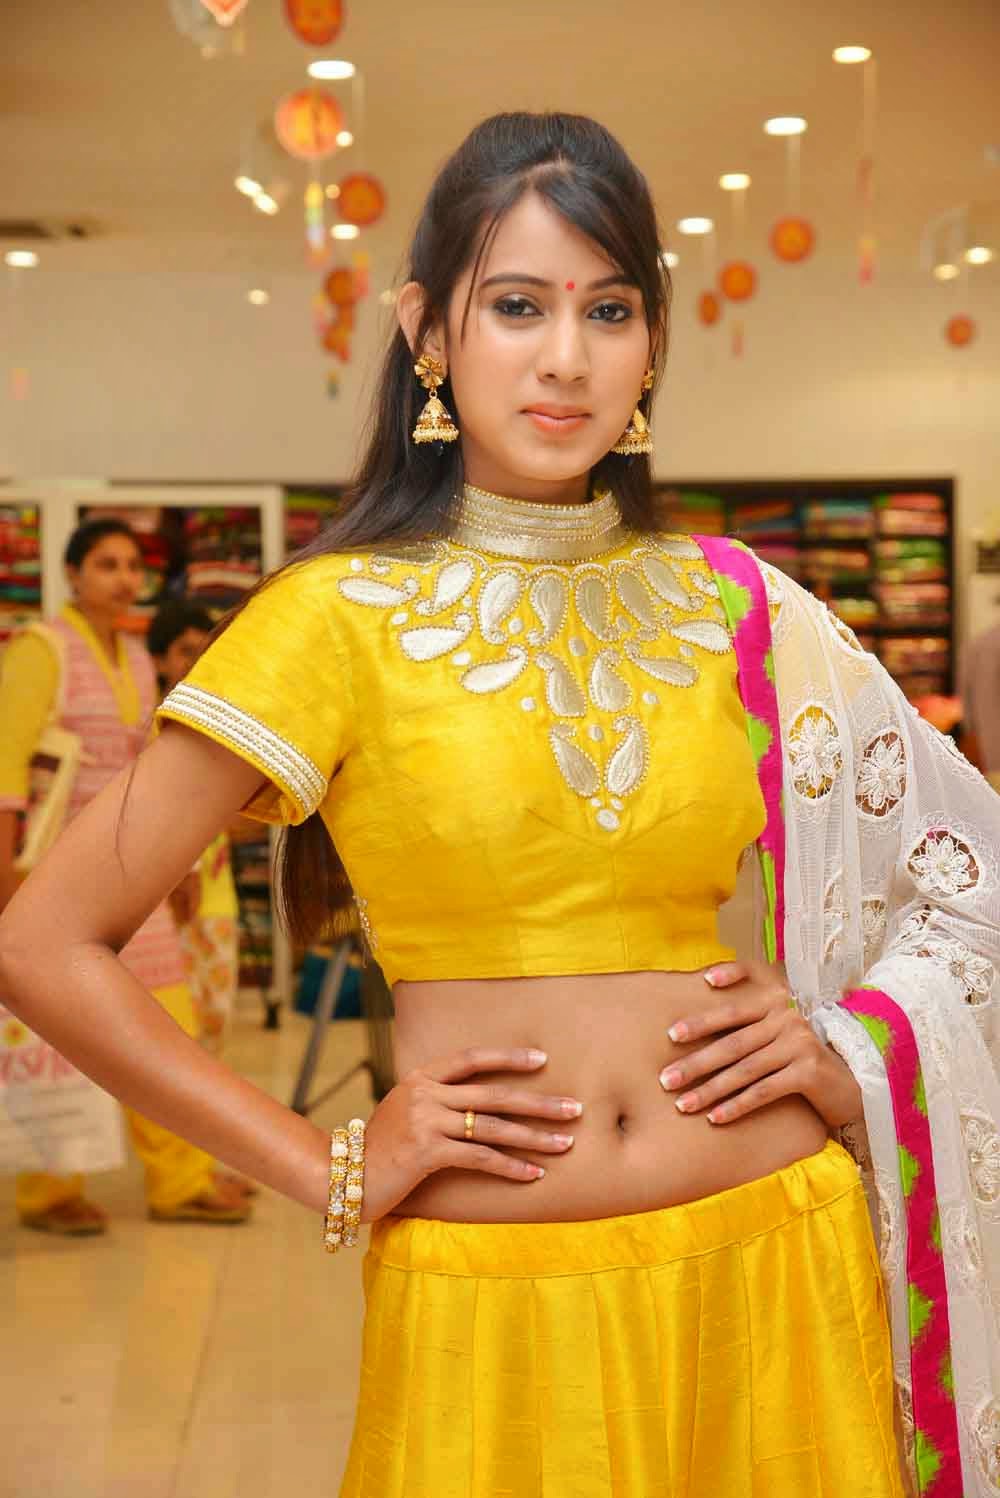 Honey Hot Sexy Navel Show In Store Opening Function PhotoShoot 4 Aaaaknc